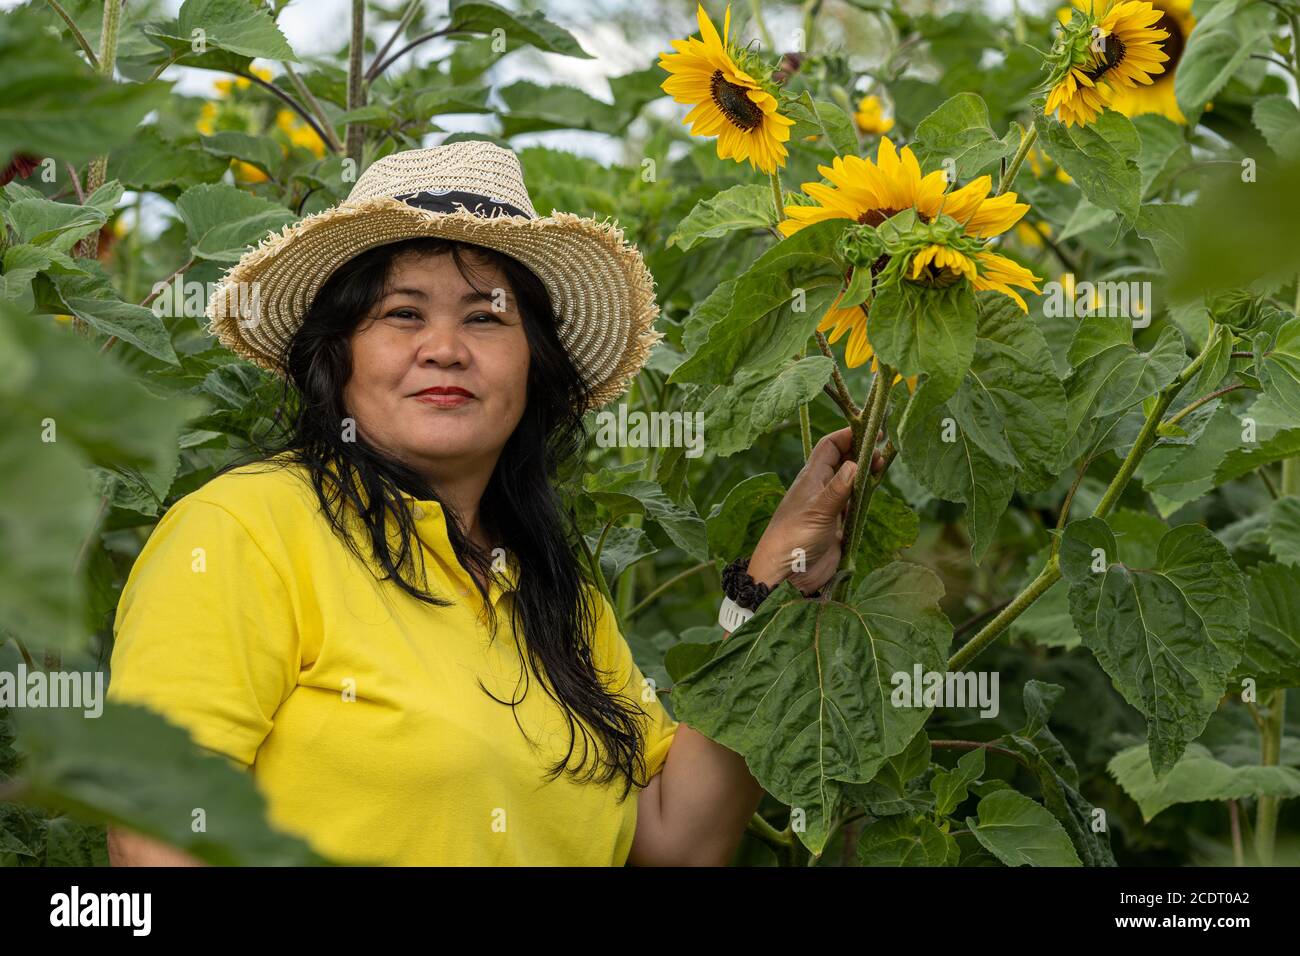 A middle-aged Asian woman, in her 50s, with a straw hat in a sunflower field Stock Photo